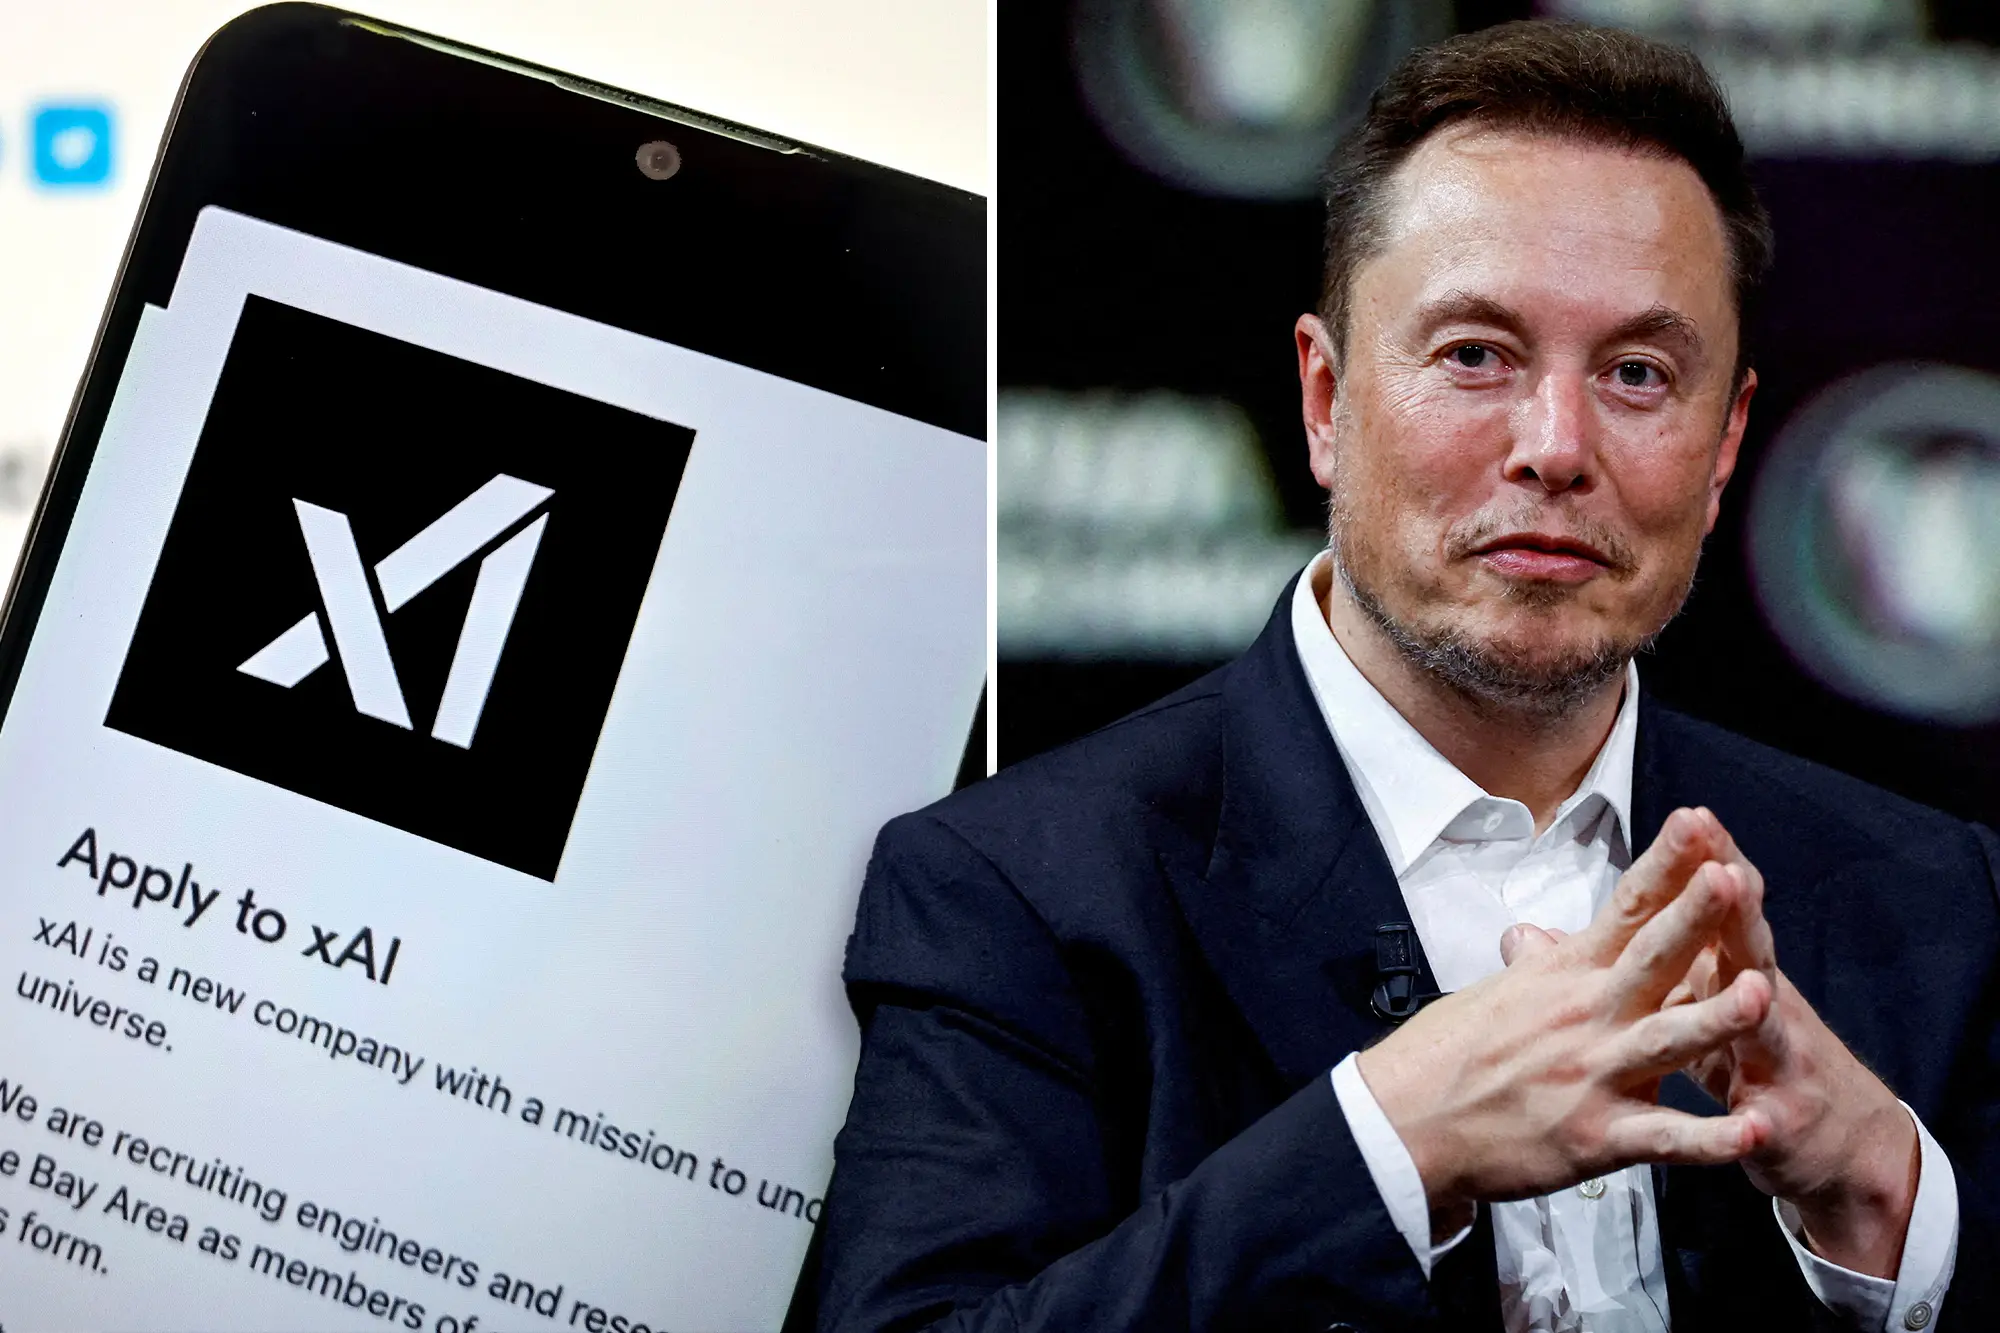 Elon Musk’s Latest Venture xAI Sets the Tech World Ablaze With a Jaw-Dropping $18 Billion Valuation